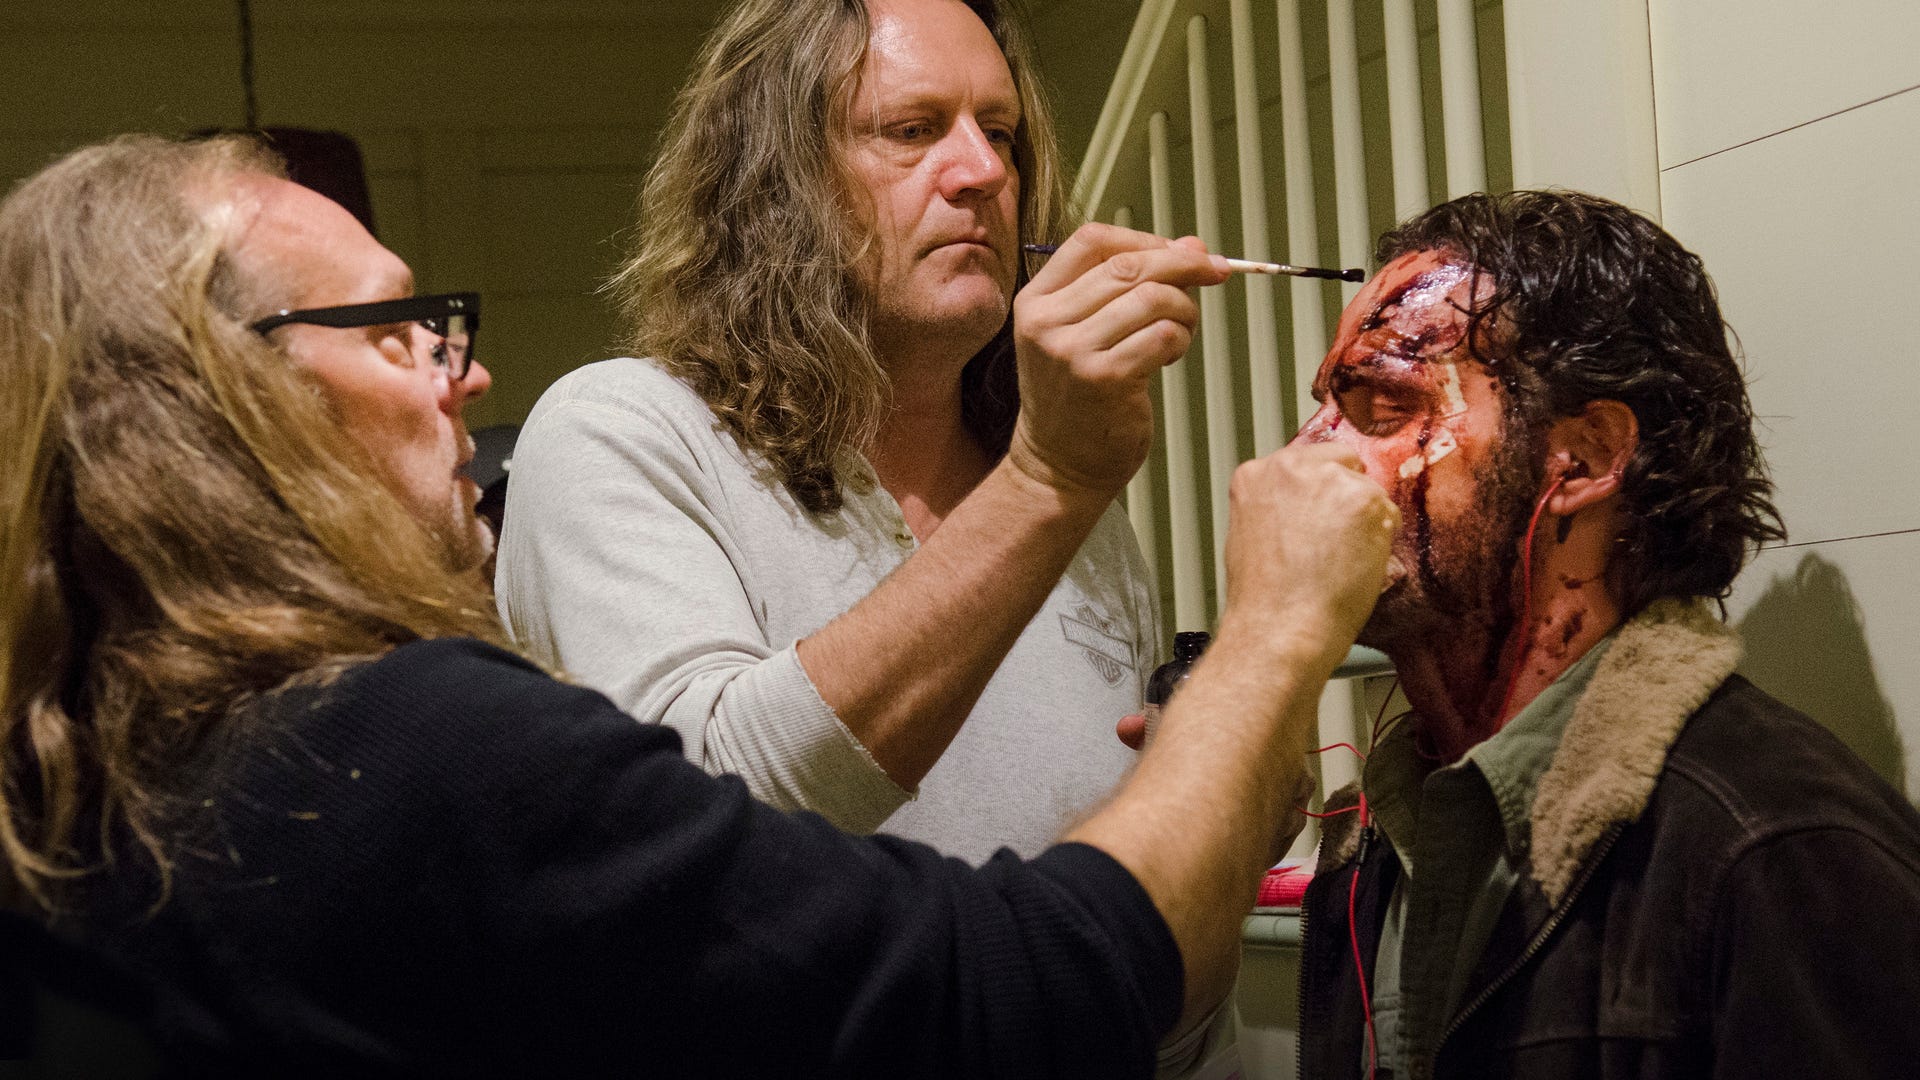 Greg Nicotero and Andrew Lincoln as Rick Grimes, The Walking Dead